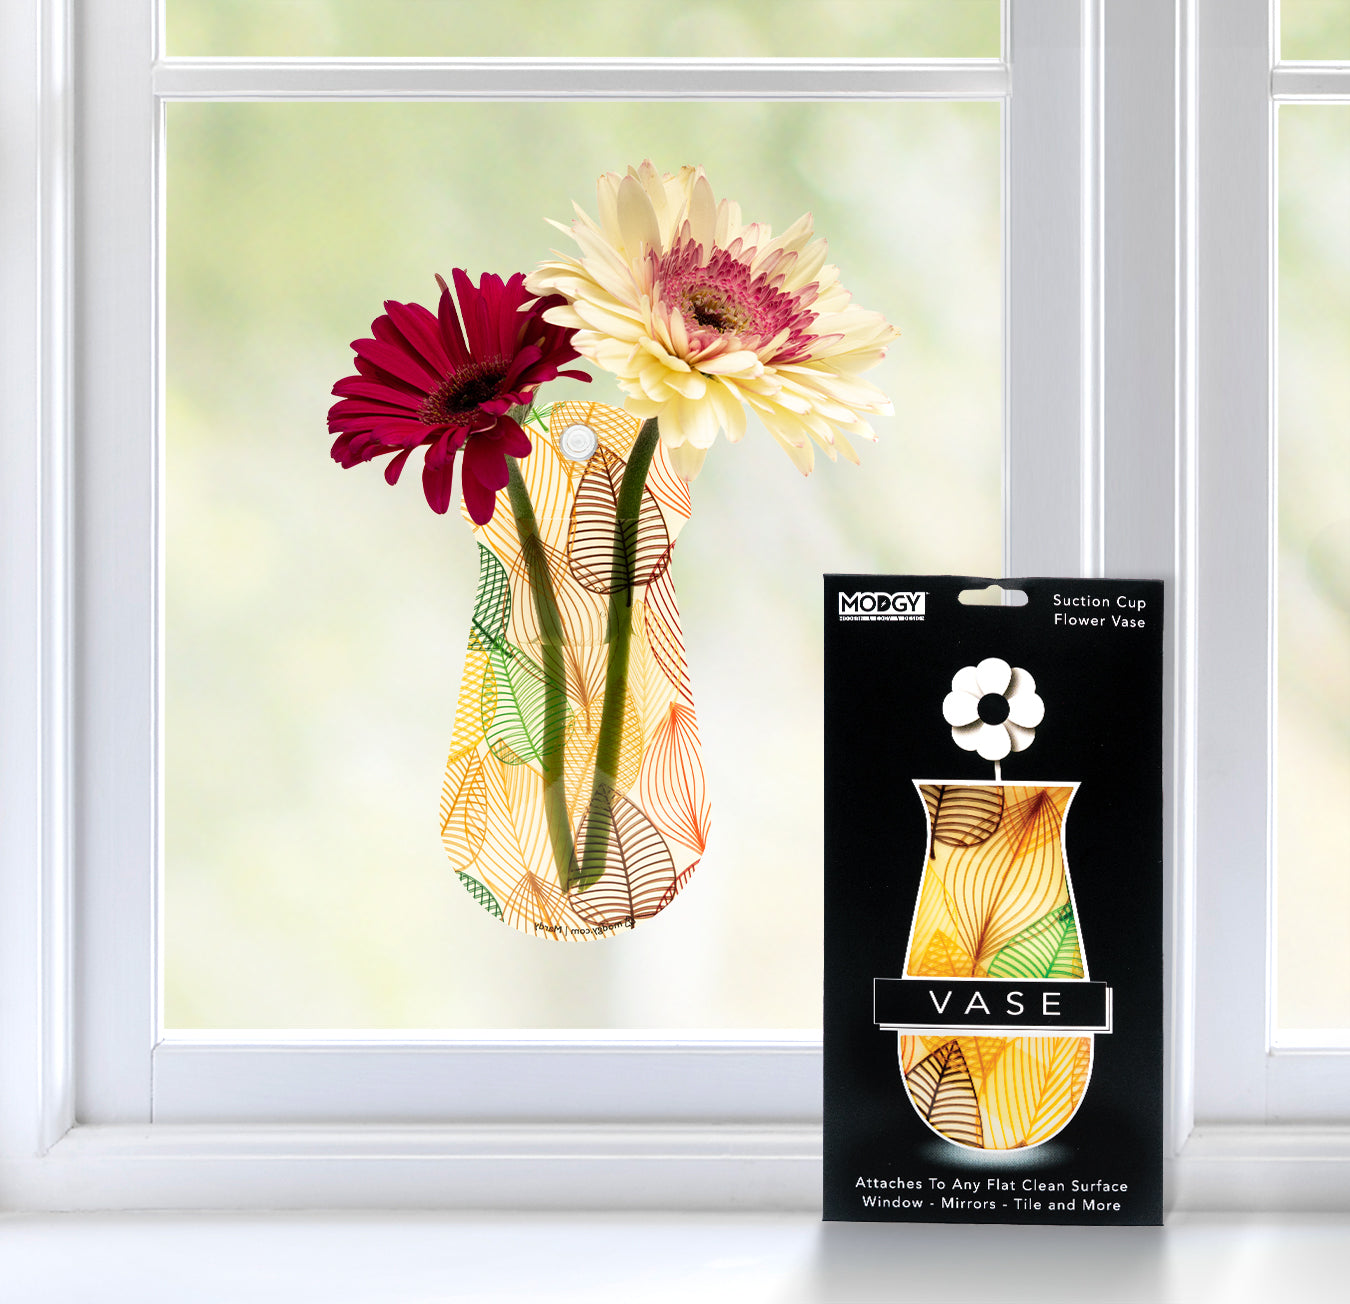 Mardy Suction Cup Vase